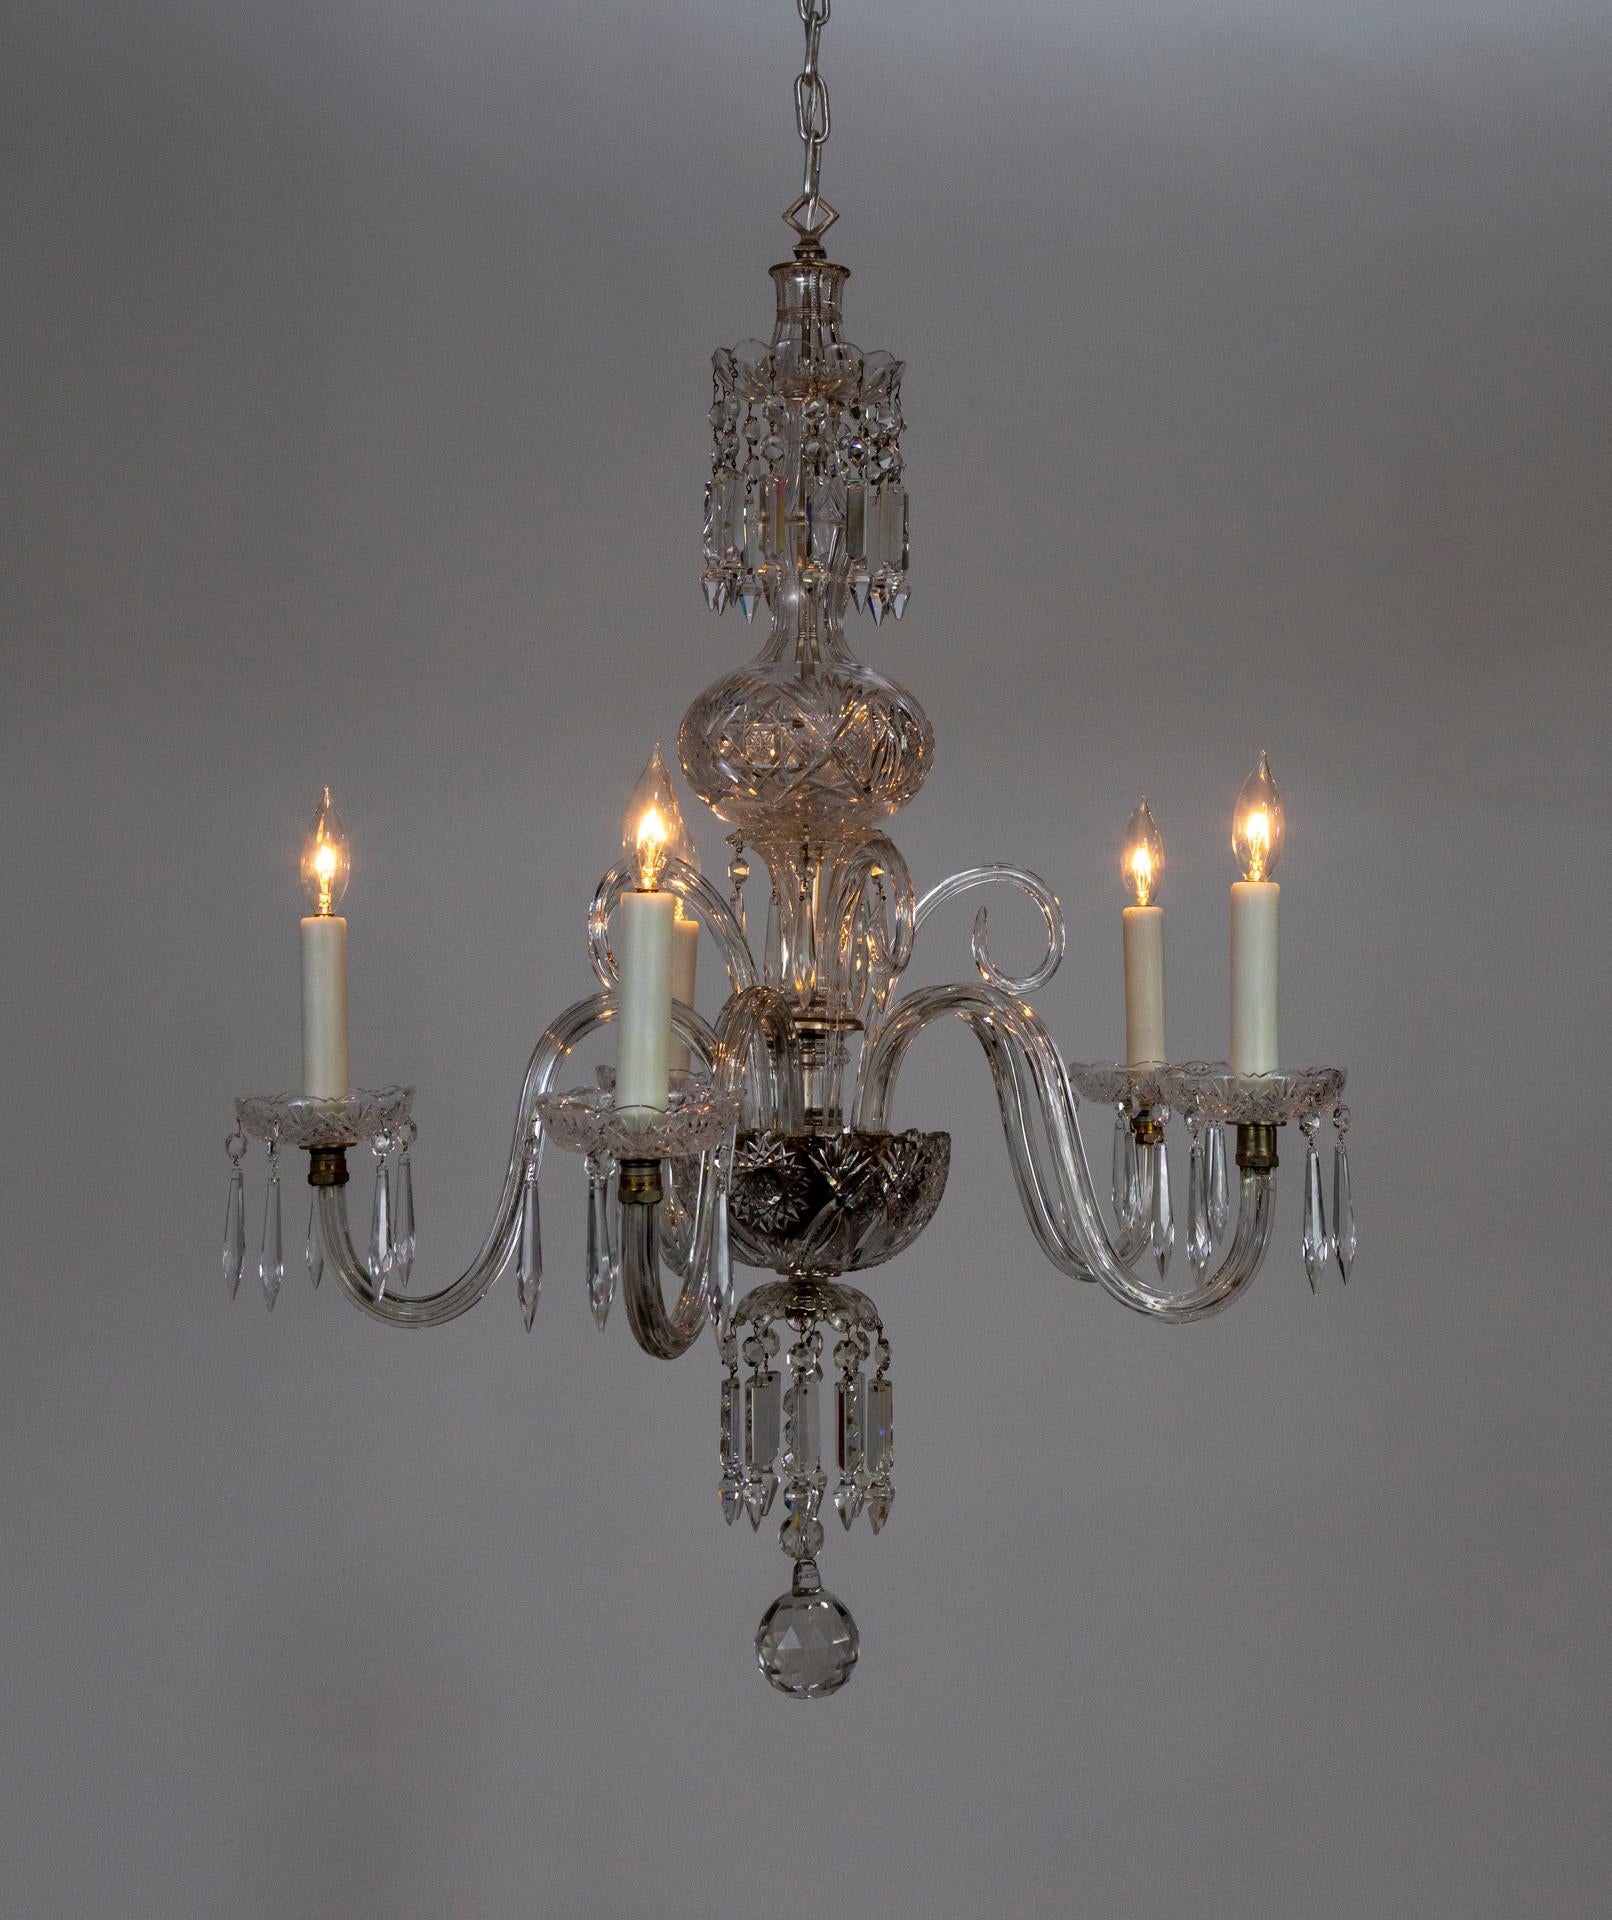 A Georgian style chandelier with waterfall oriented crystals on the top and bottom, intricately cut crystal bowls and bobeches, crystal scroll arms and curling accents, and a large, faceted ball finial. Made in Italy in the early 20th century; in